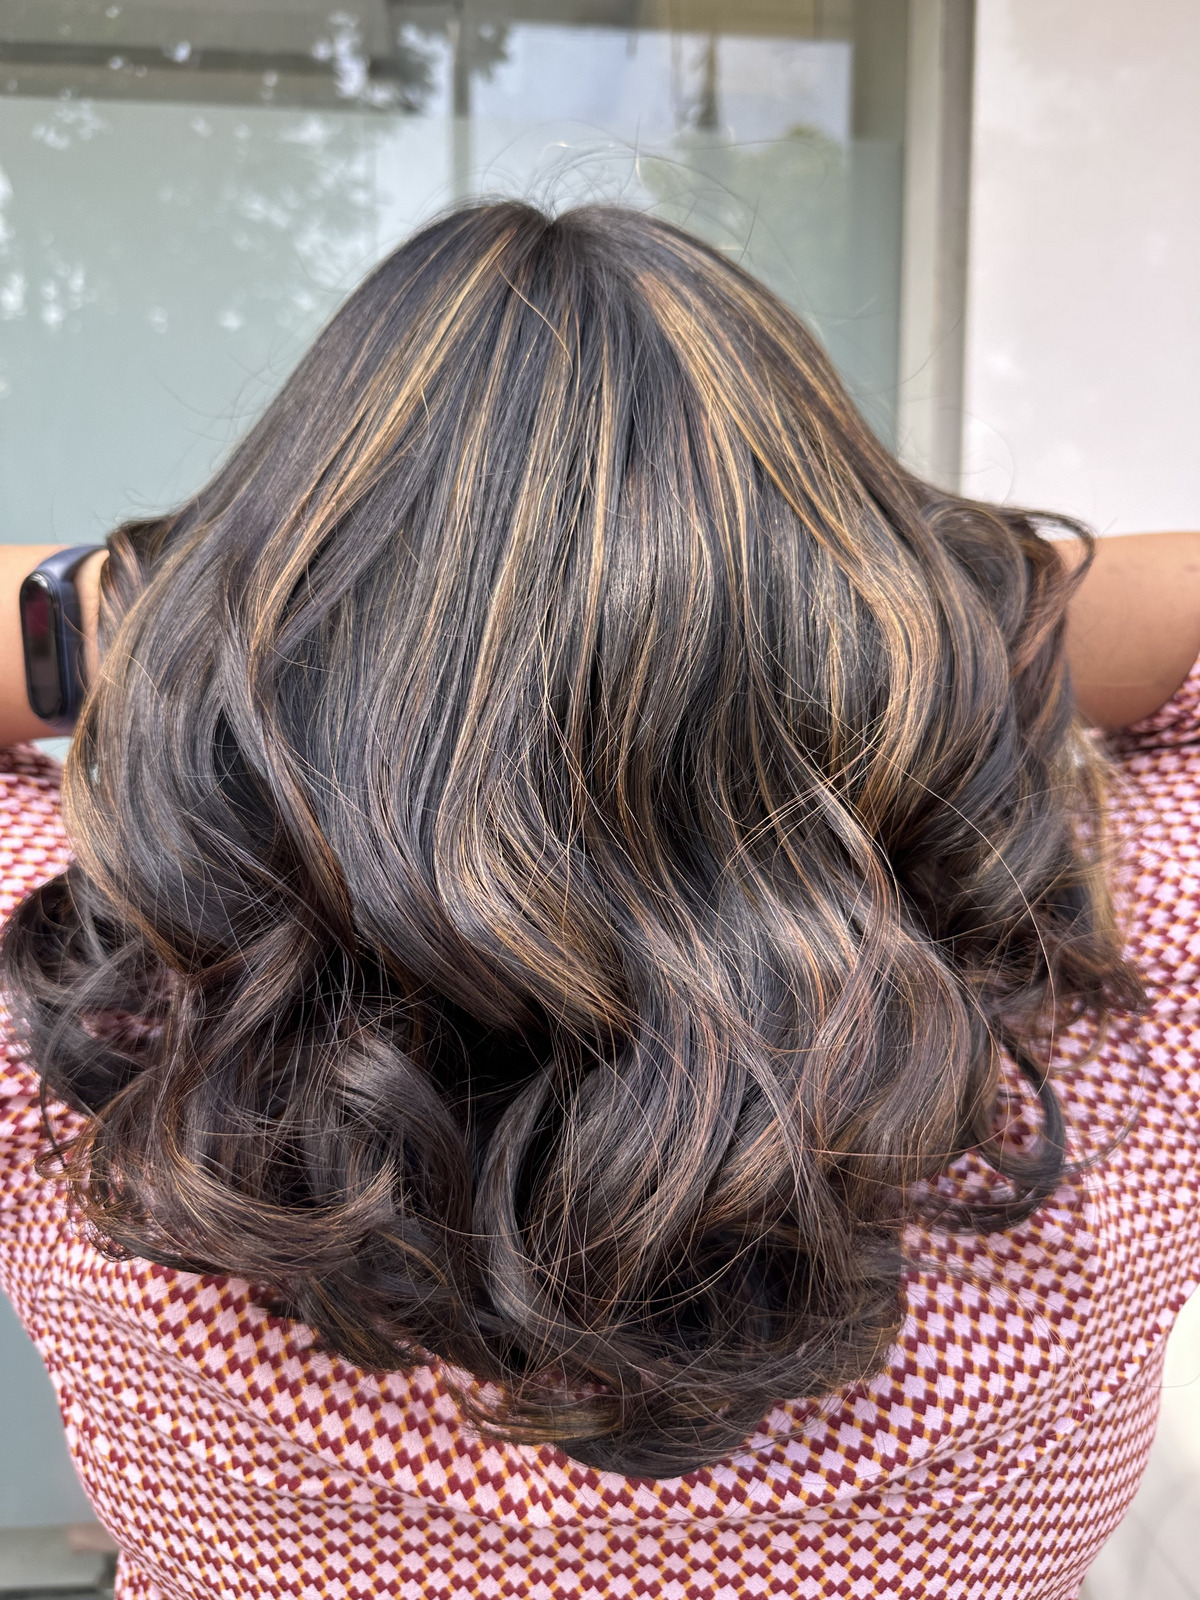 Chocolate brown highlights